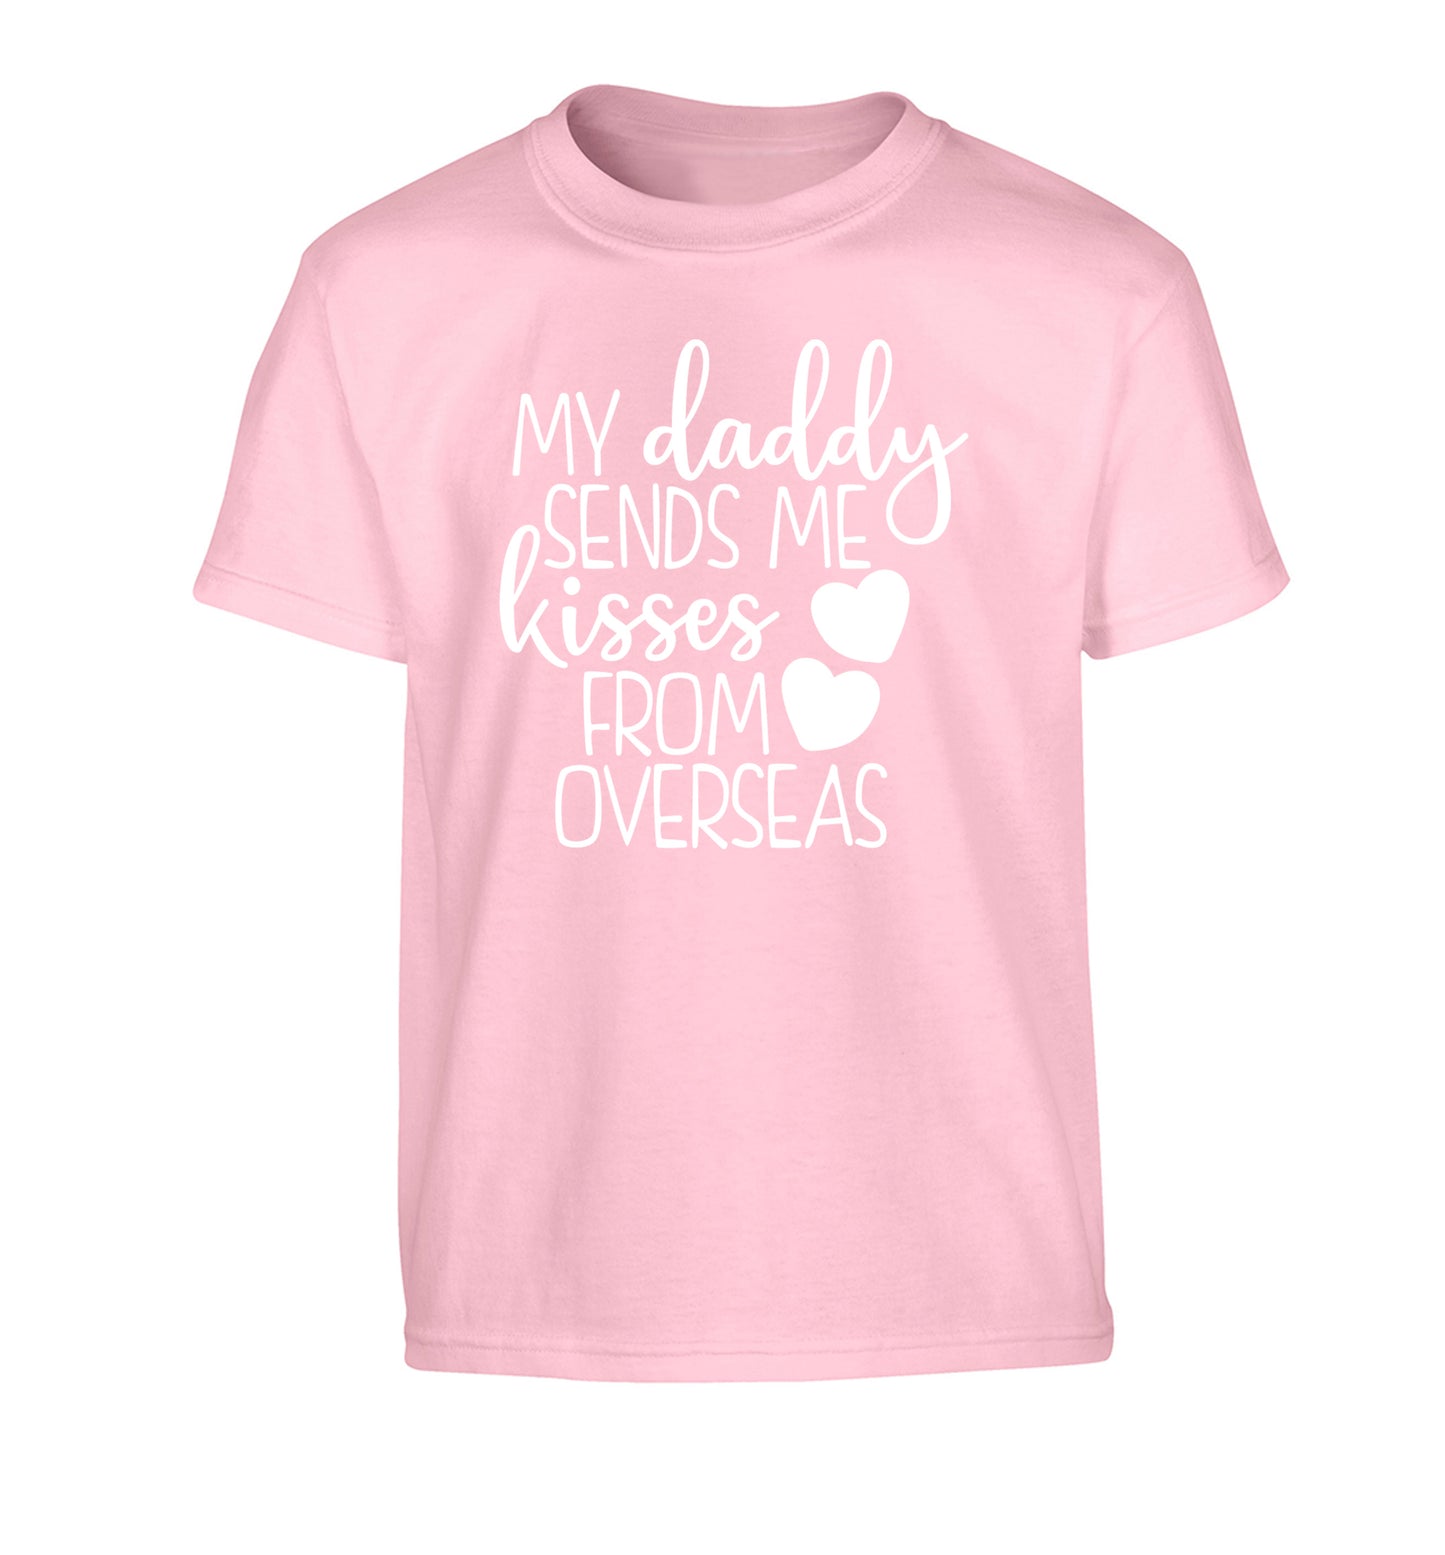 My daddy sends me kisses from overseas Children's light pink Tshirt 12-13 Years